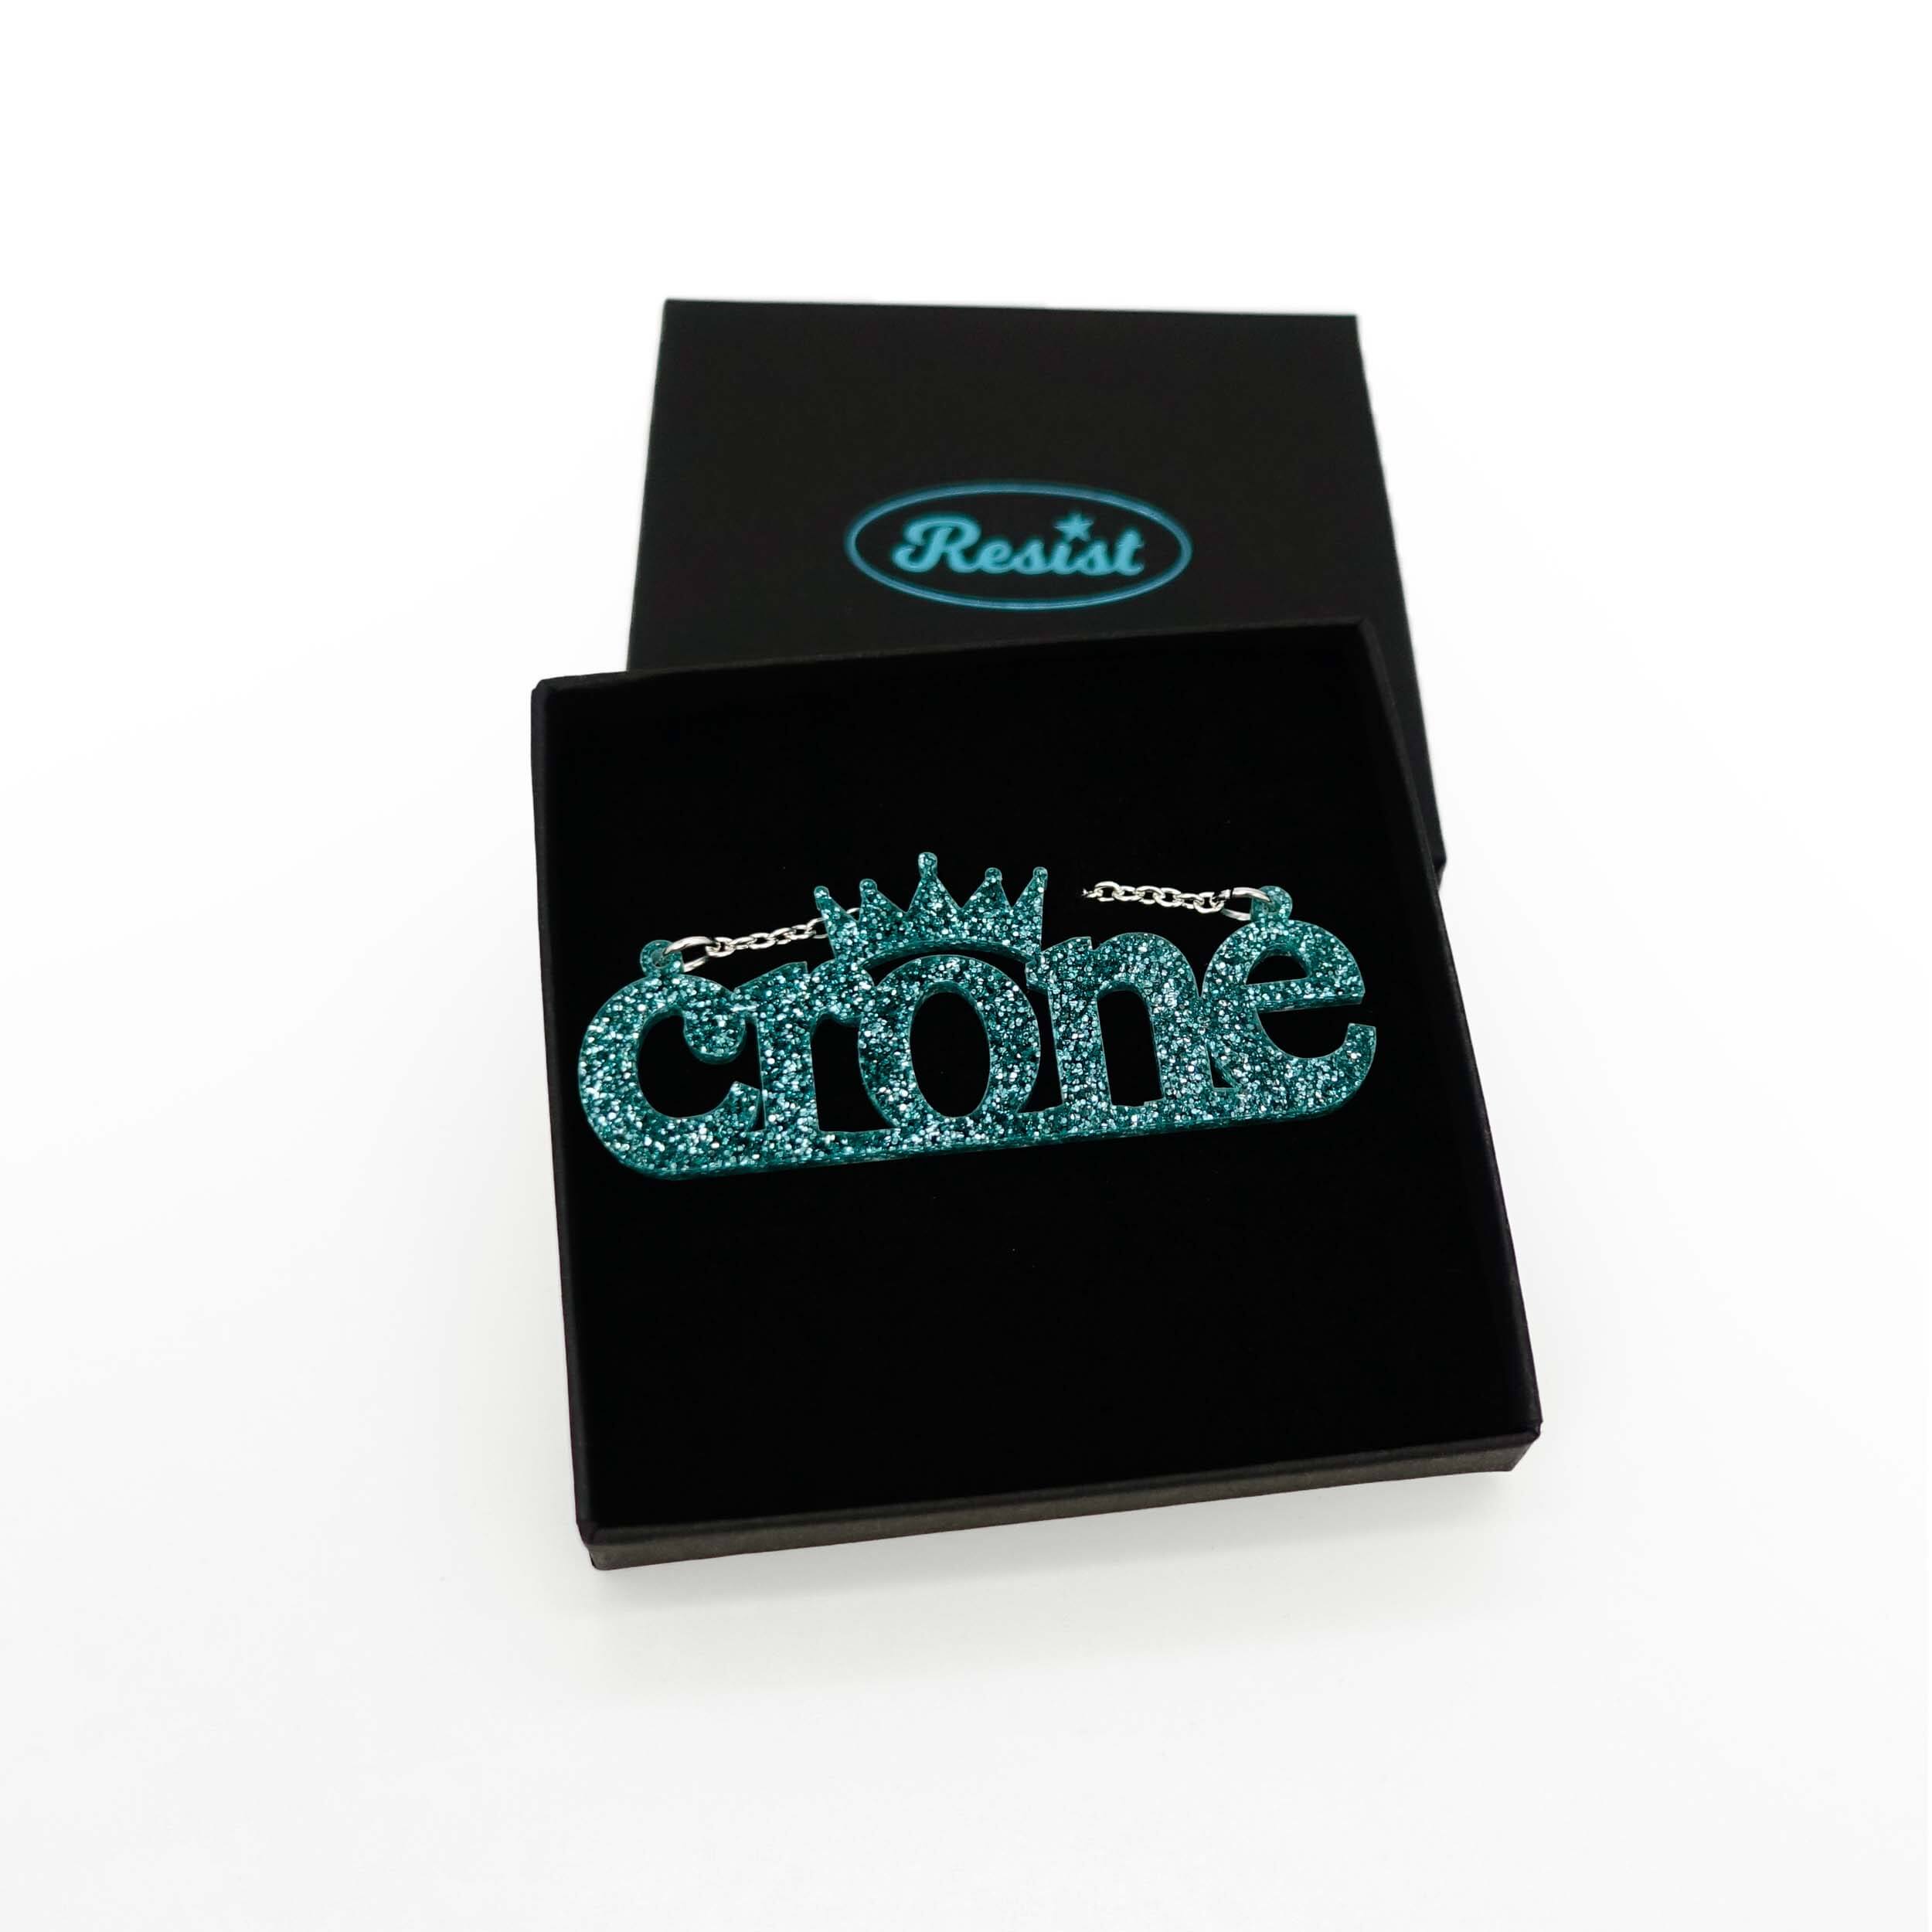 Crone necklace in teal glitter, shown in a Wear and Resist gift box. 